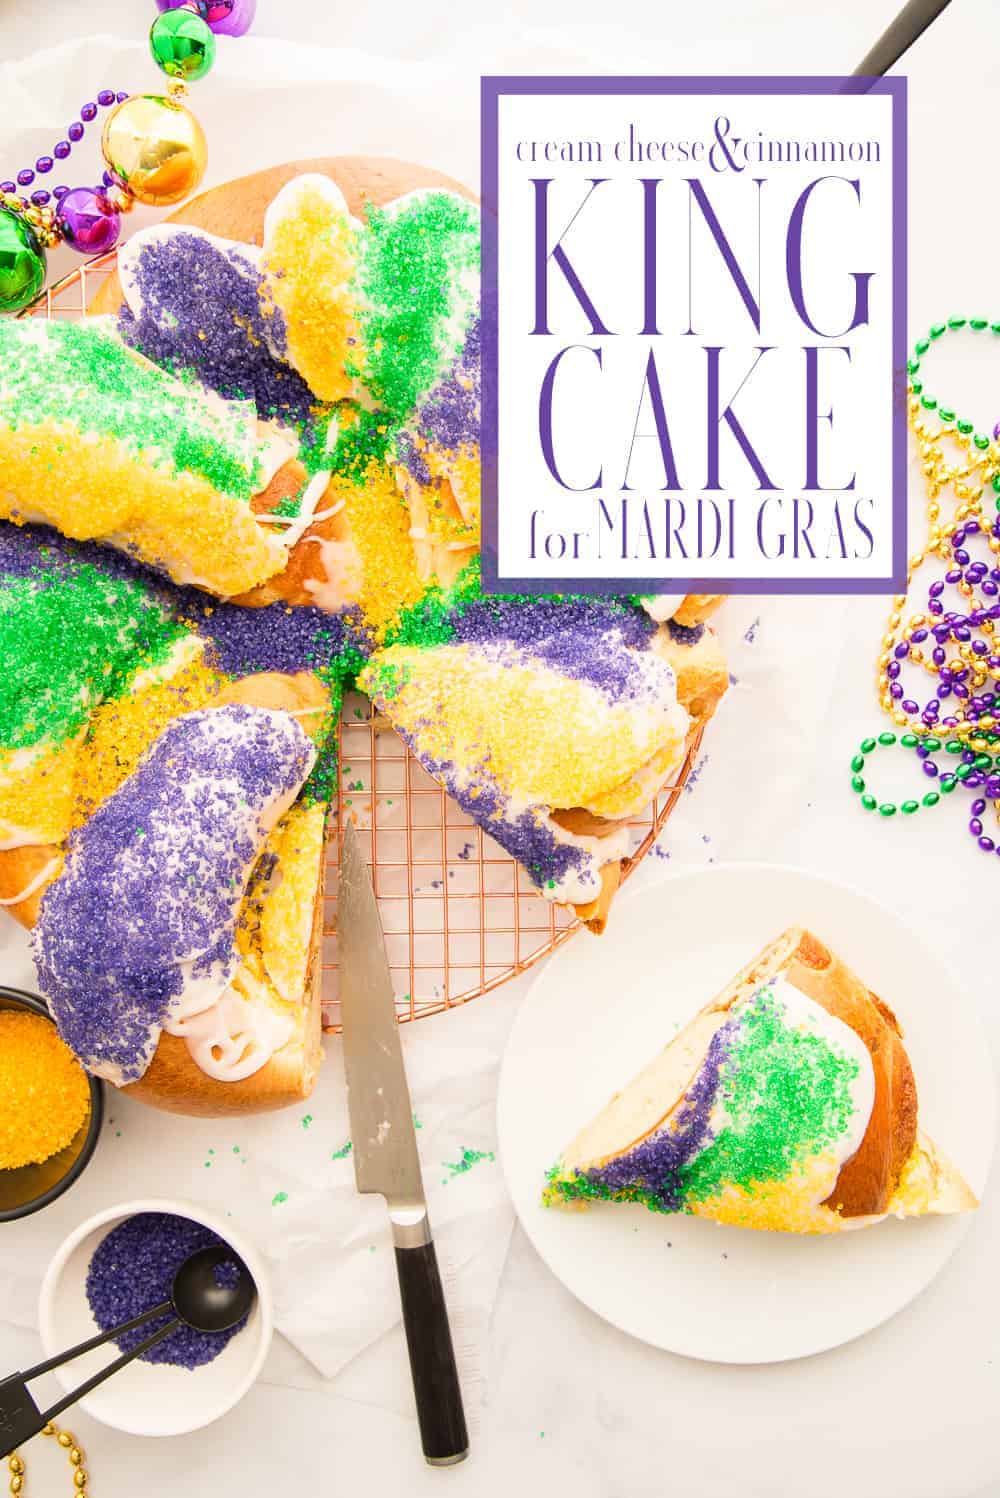 King Cake is a Mardi Gras staple! Make yours extra special with a swirl of cinnamon and cream cheese filling. Top with the colors of Mardi Gras for an extra-festive treat. Plastic baby not necessary. #mardigras #kingcake #mardigraskingcake #cinnamonkingcake #creamcheesekingcake #baking #breadrecipe #recetadeMardiGras #sandingsugar #holidayrecipe #breadbakingrecipe  via @ediblesense